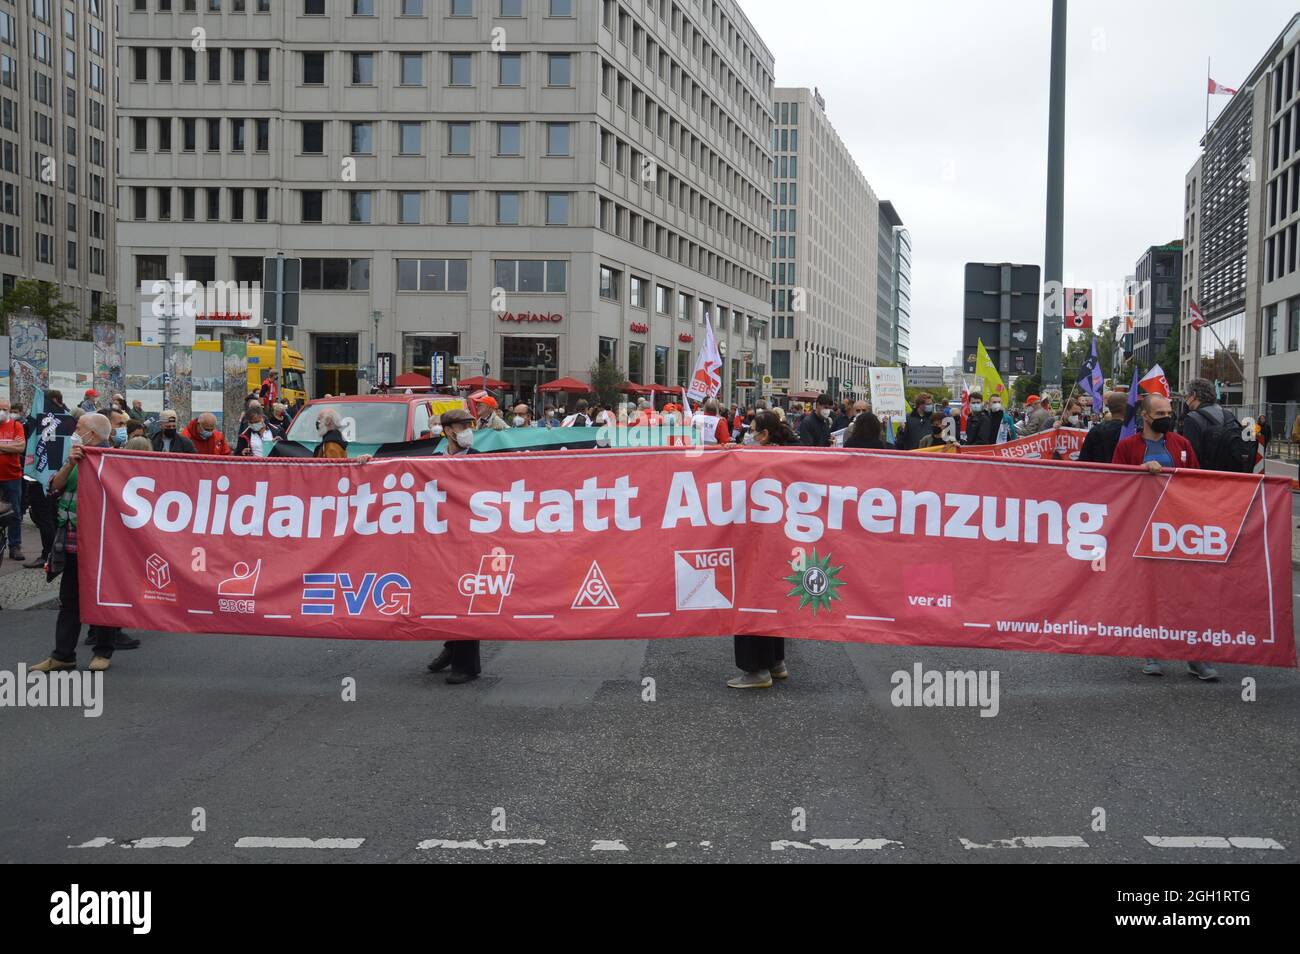 Demonstration for solidary society in Berlin, Germany - September 4, 2021. Stock Photo